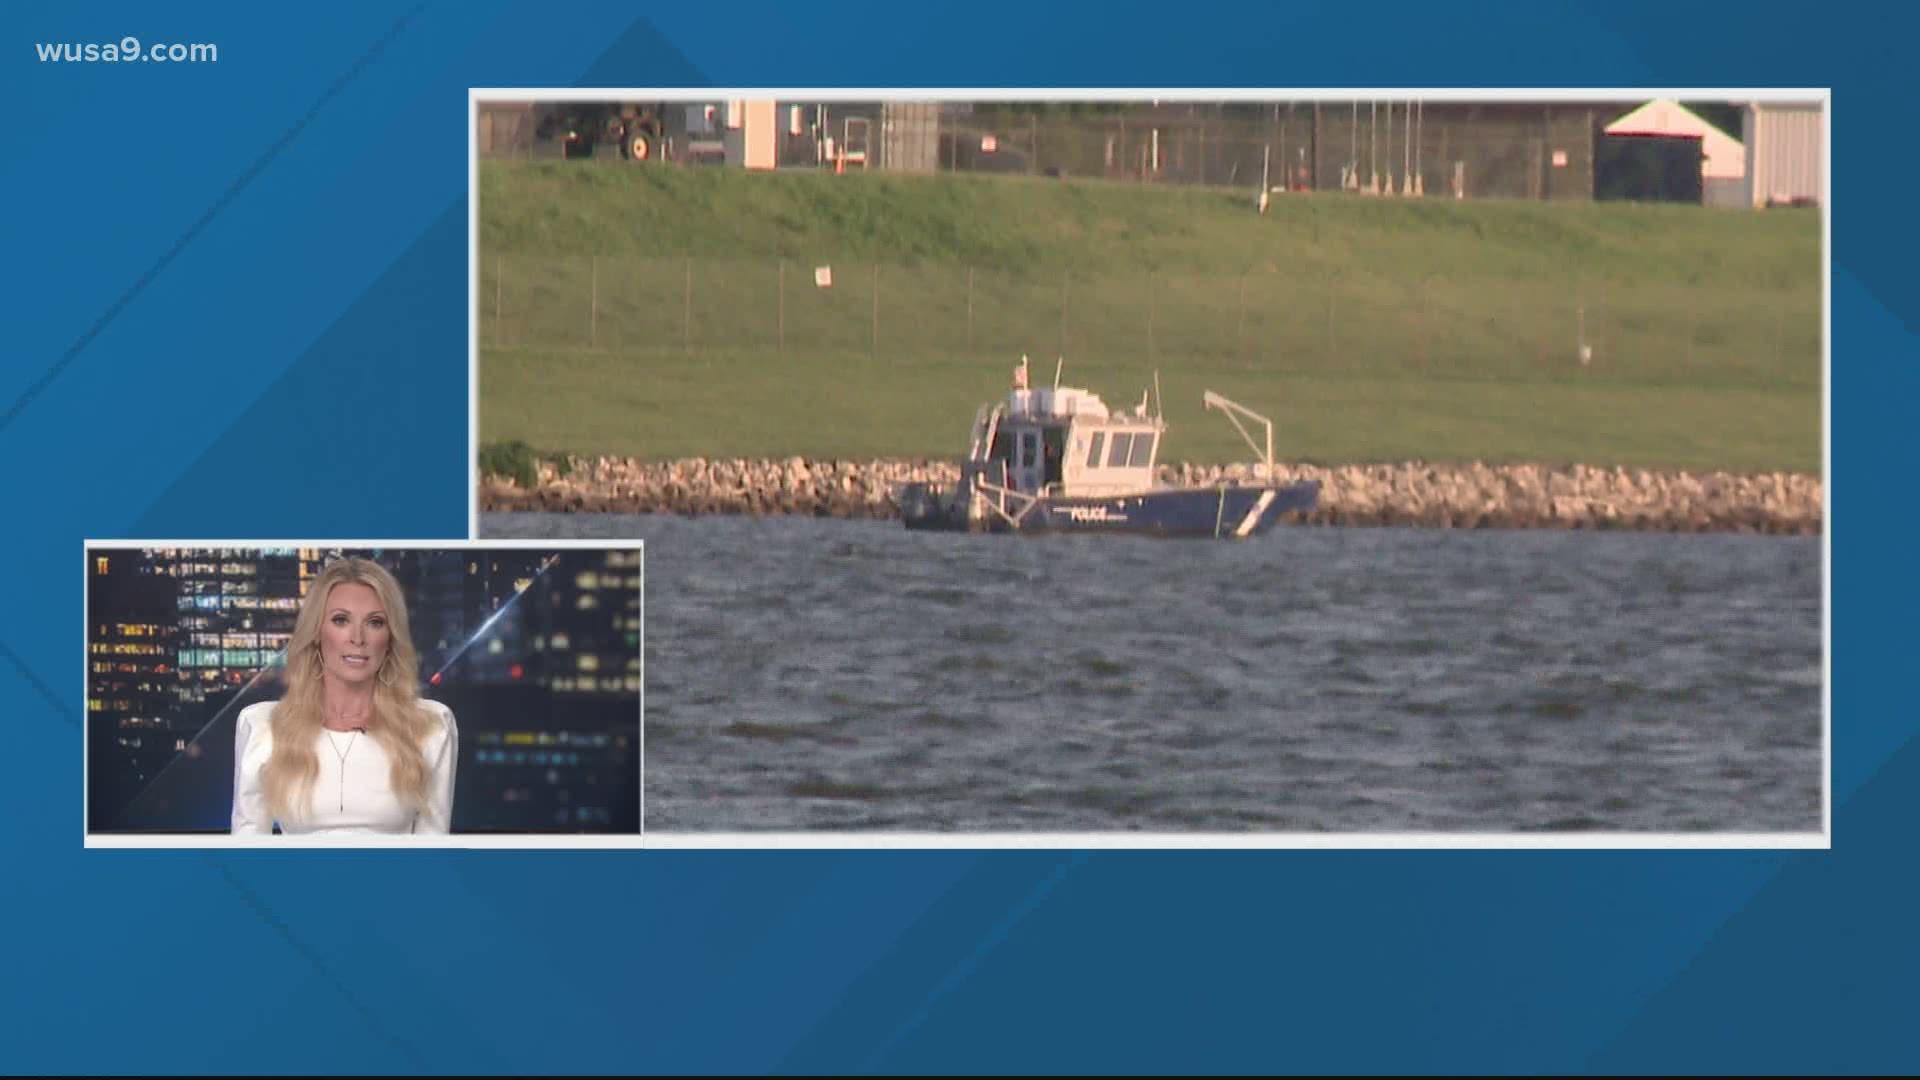 DC Police and Fire/EMS have been looking for the boaters near the vicinity of Joint Base Anacostia-Bolling.